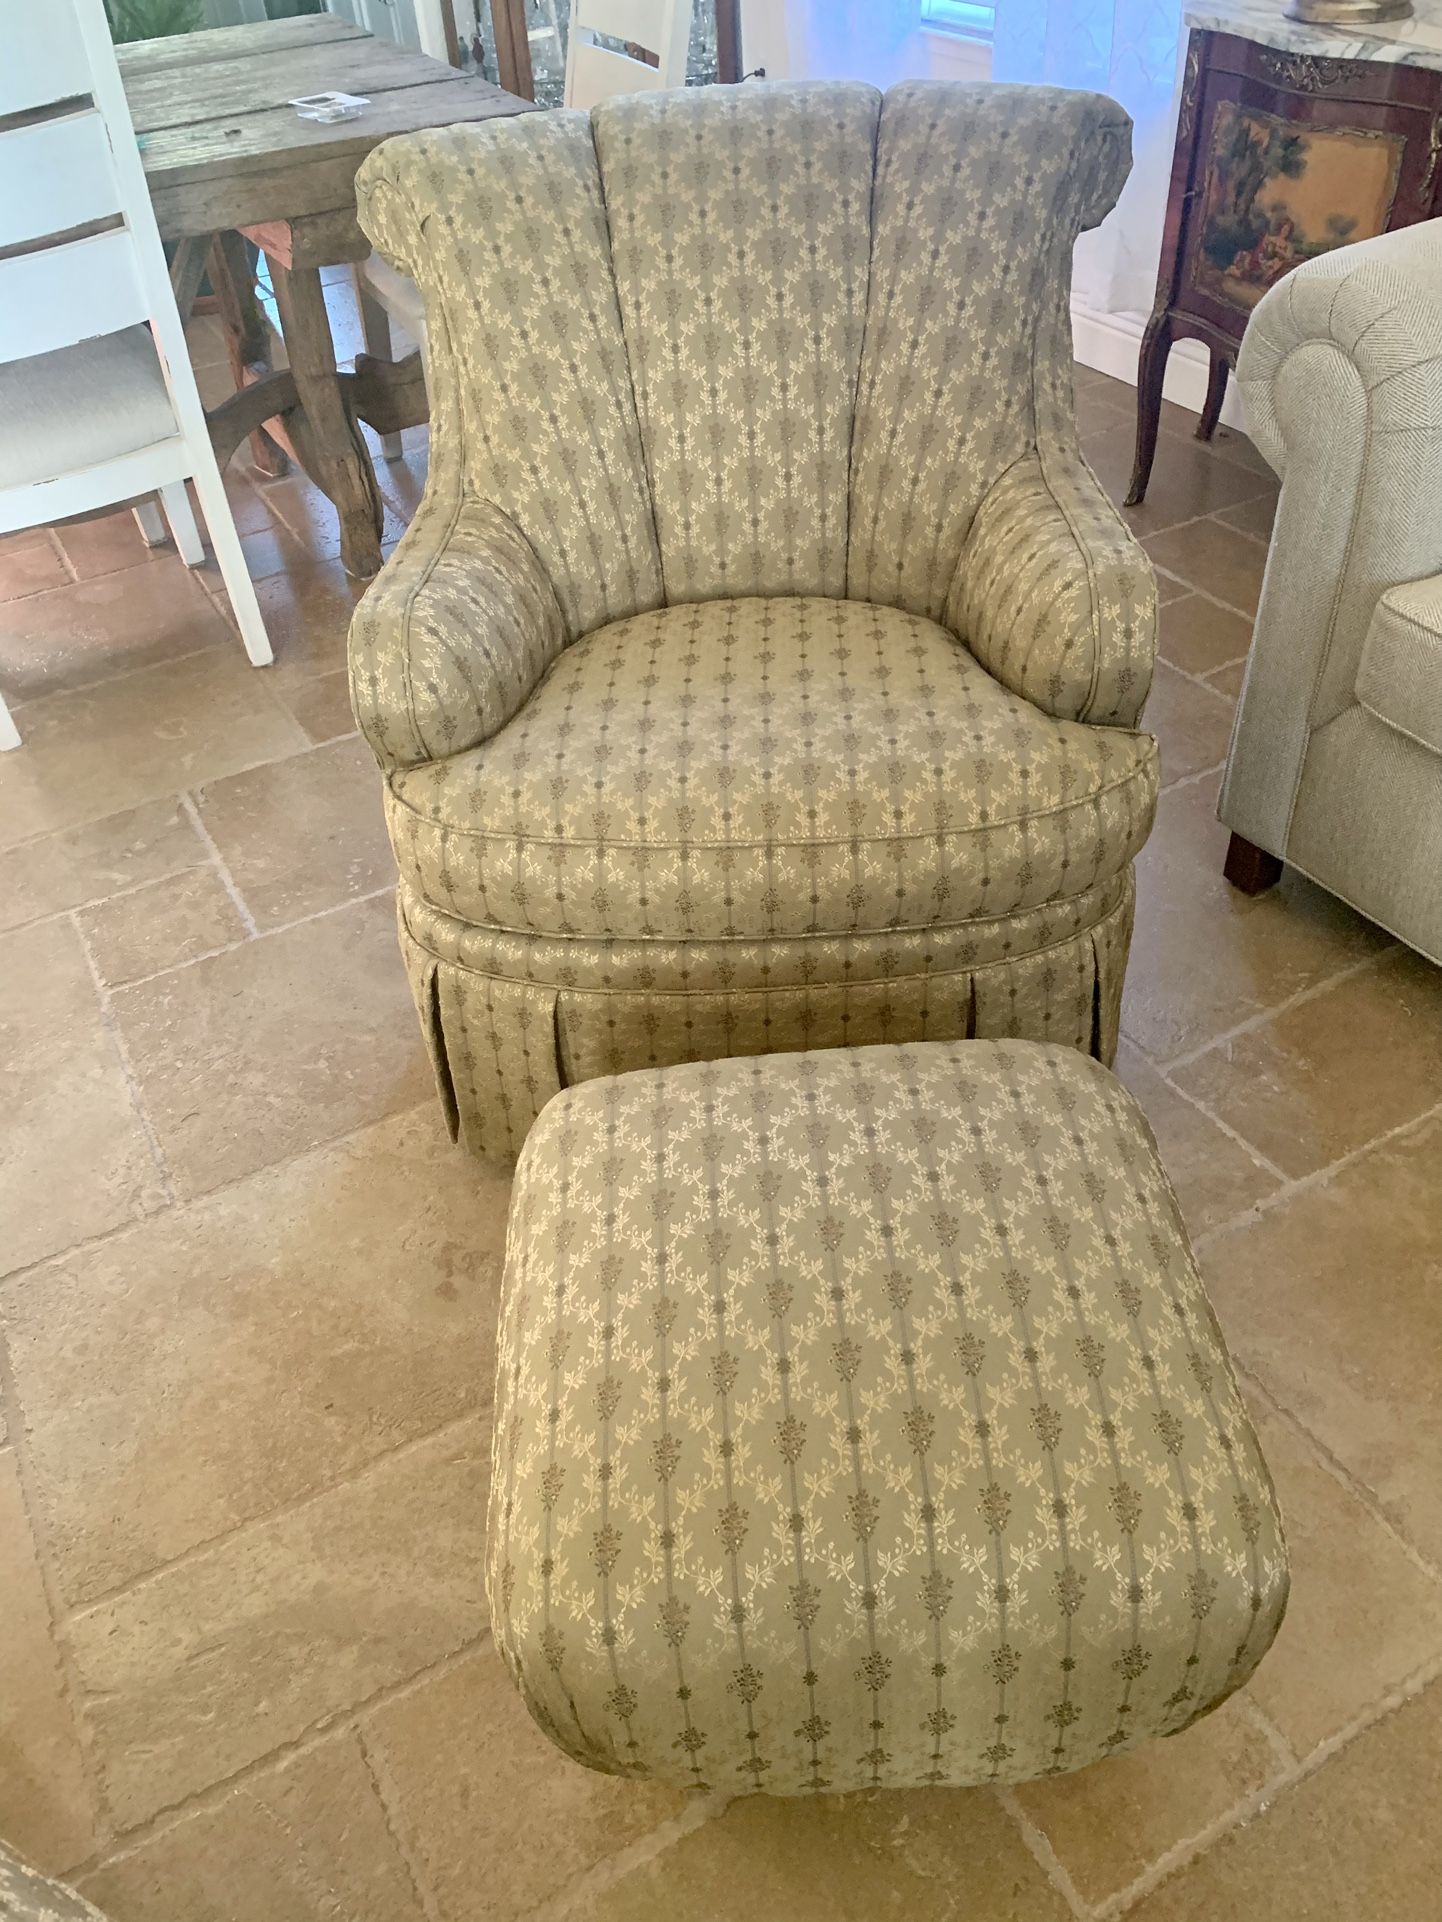 Absolutely Gorgeous Upholstered Chair With Matching Ottoman.